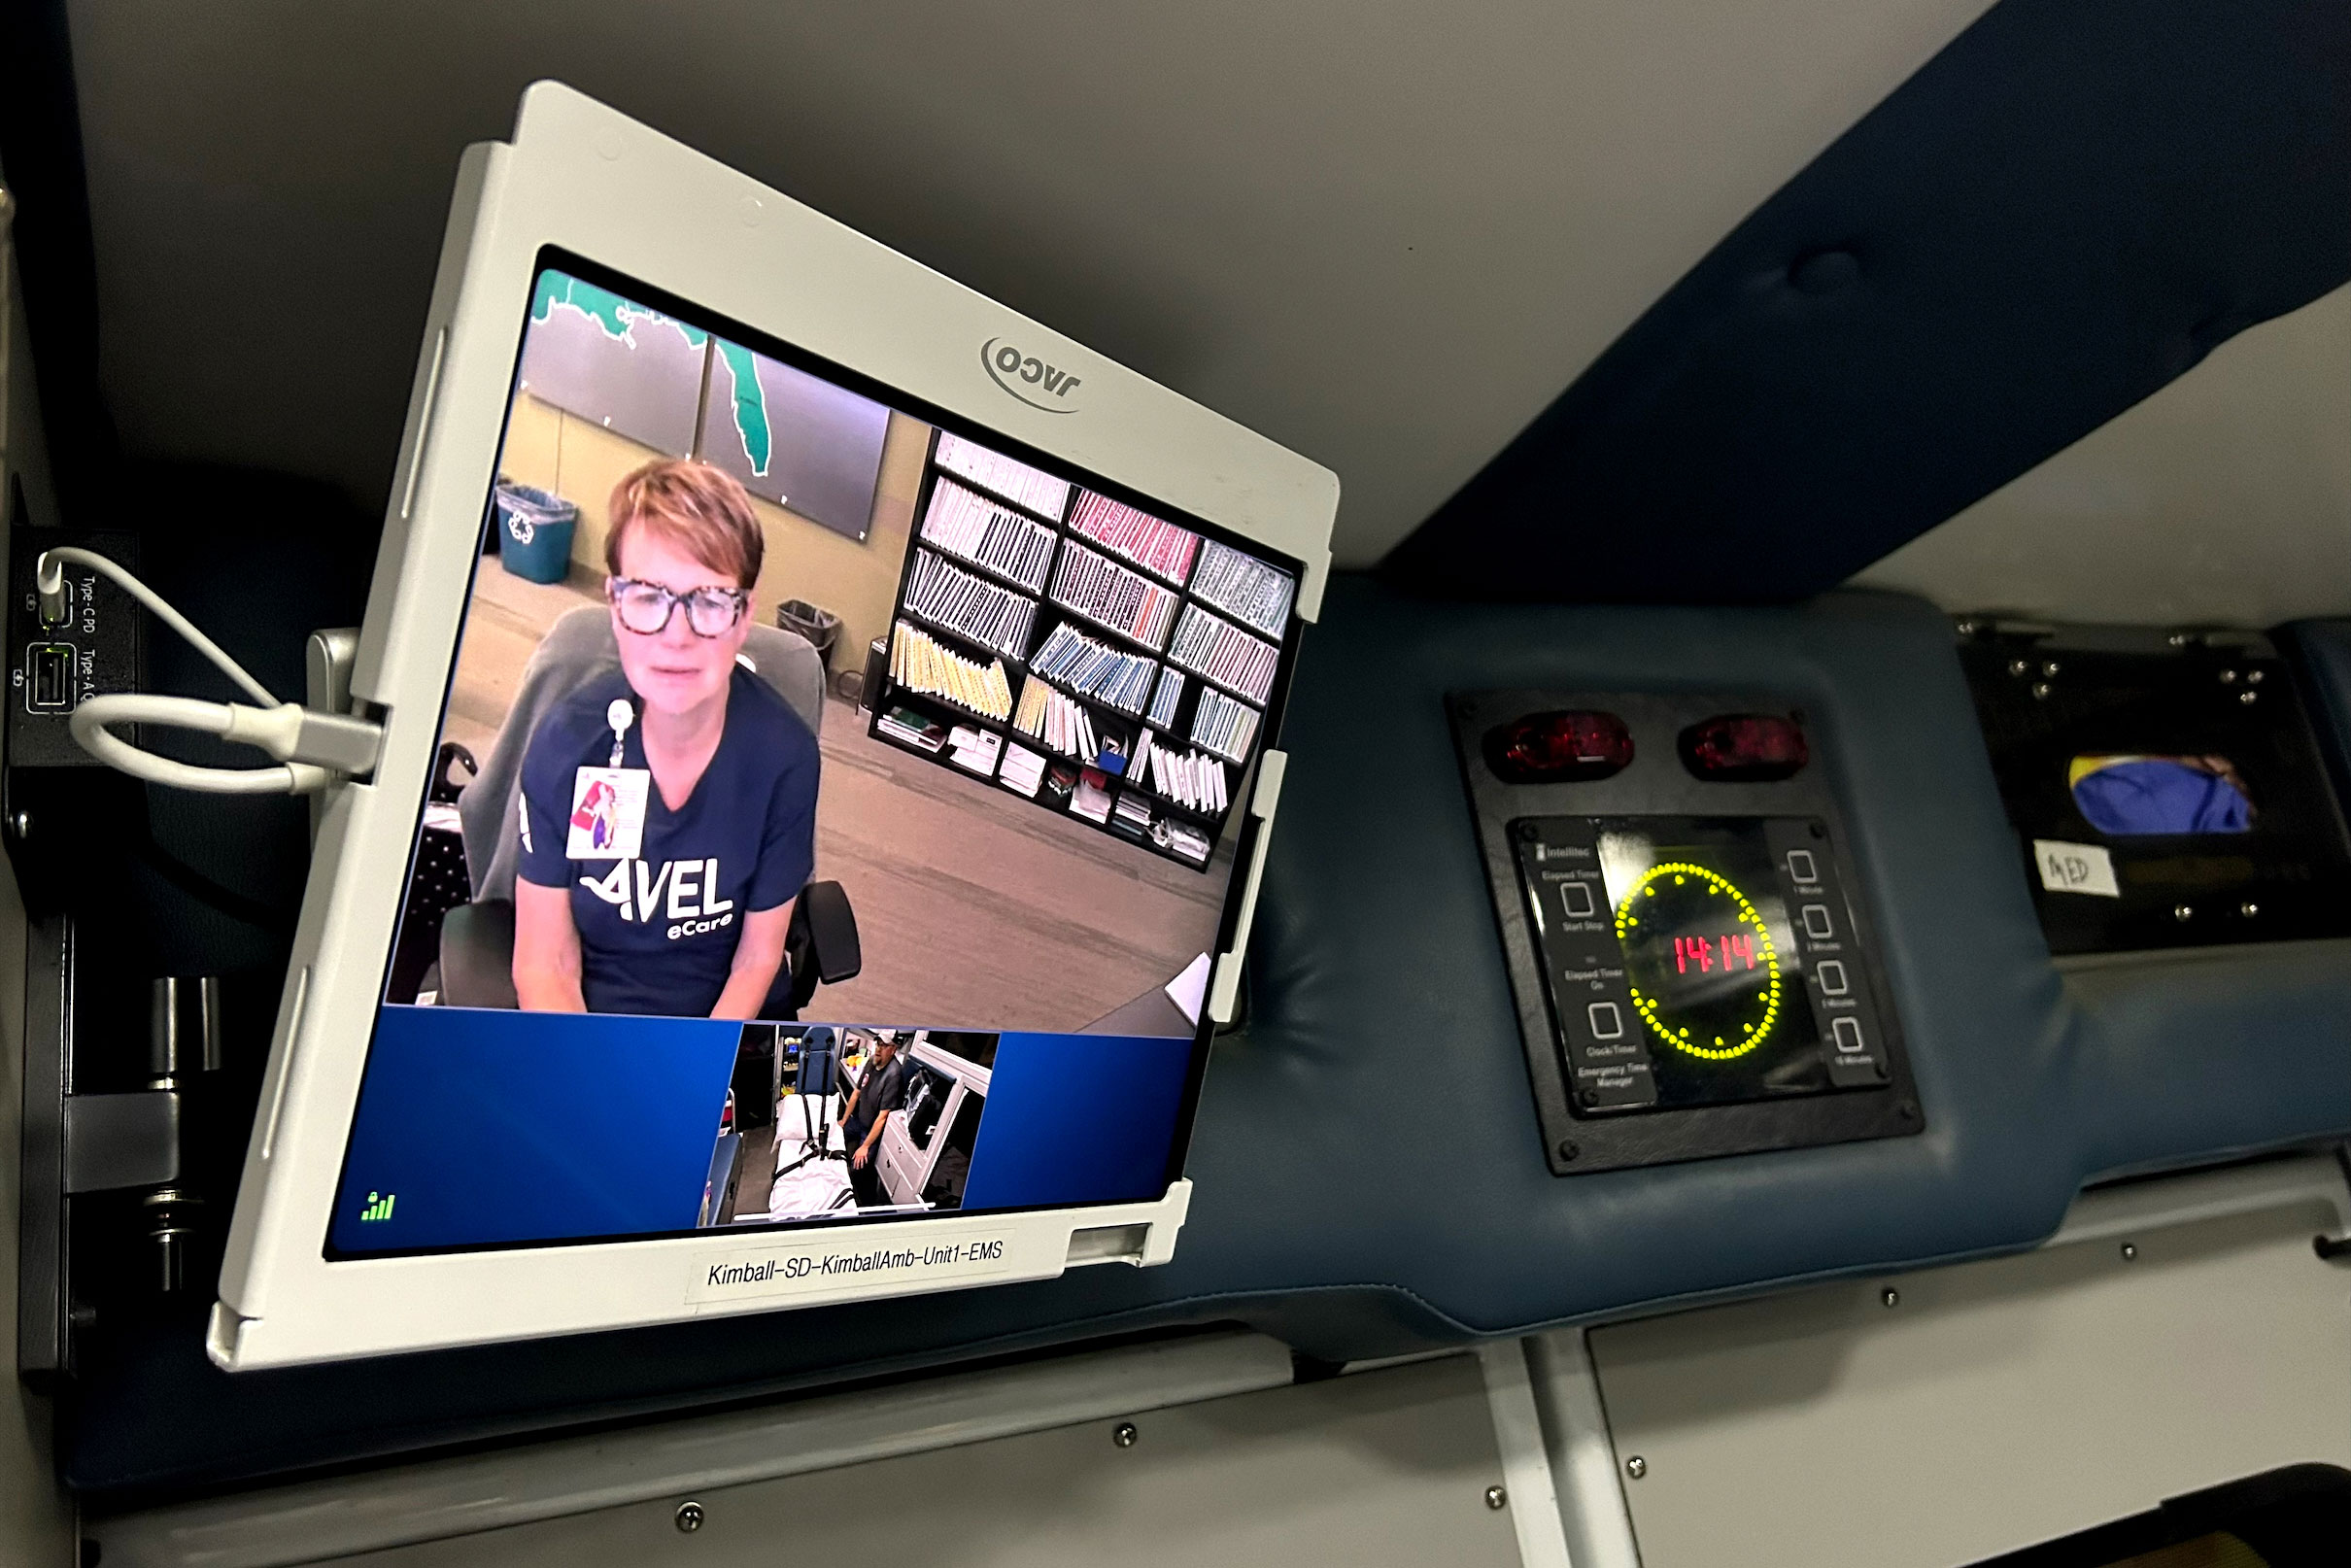 A tablet is mounted on the inside of an ambulance and you can see someone and someone sitting in a chair in an office and wearing a name badge and t-shirt that reads "Avel eCare" is shown on the screen.